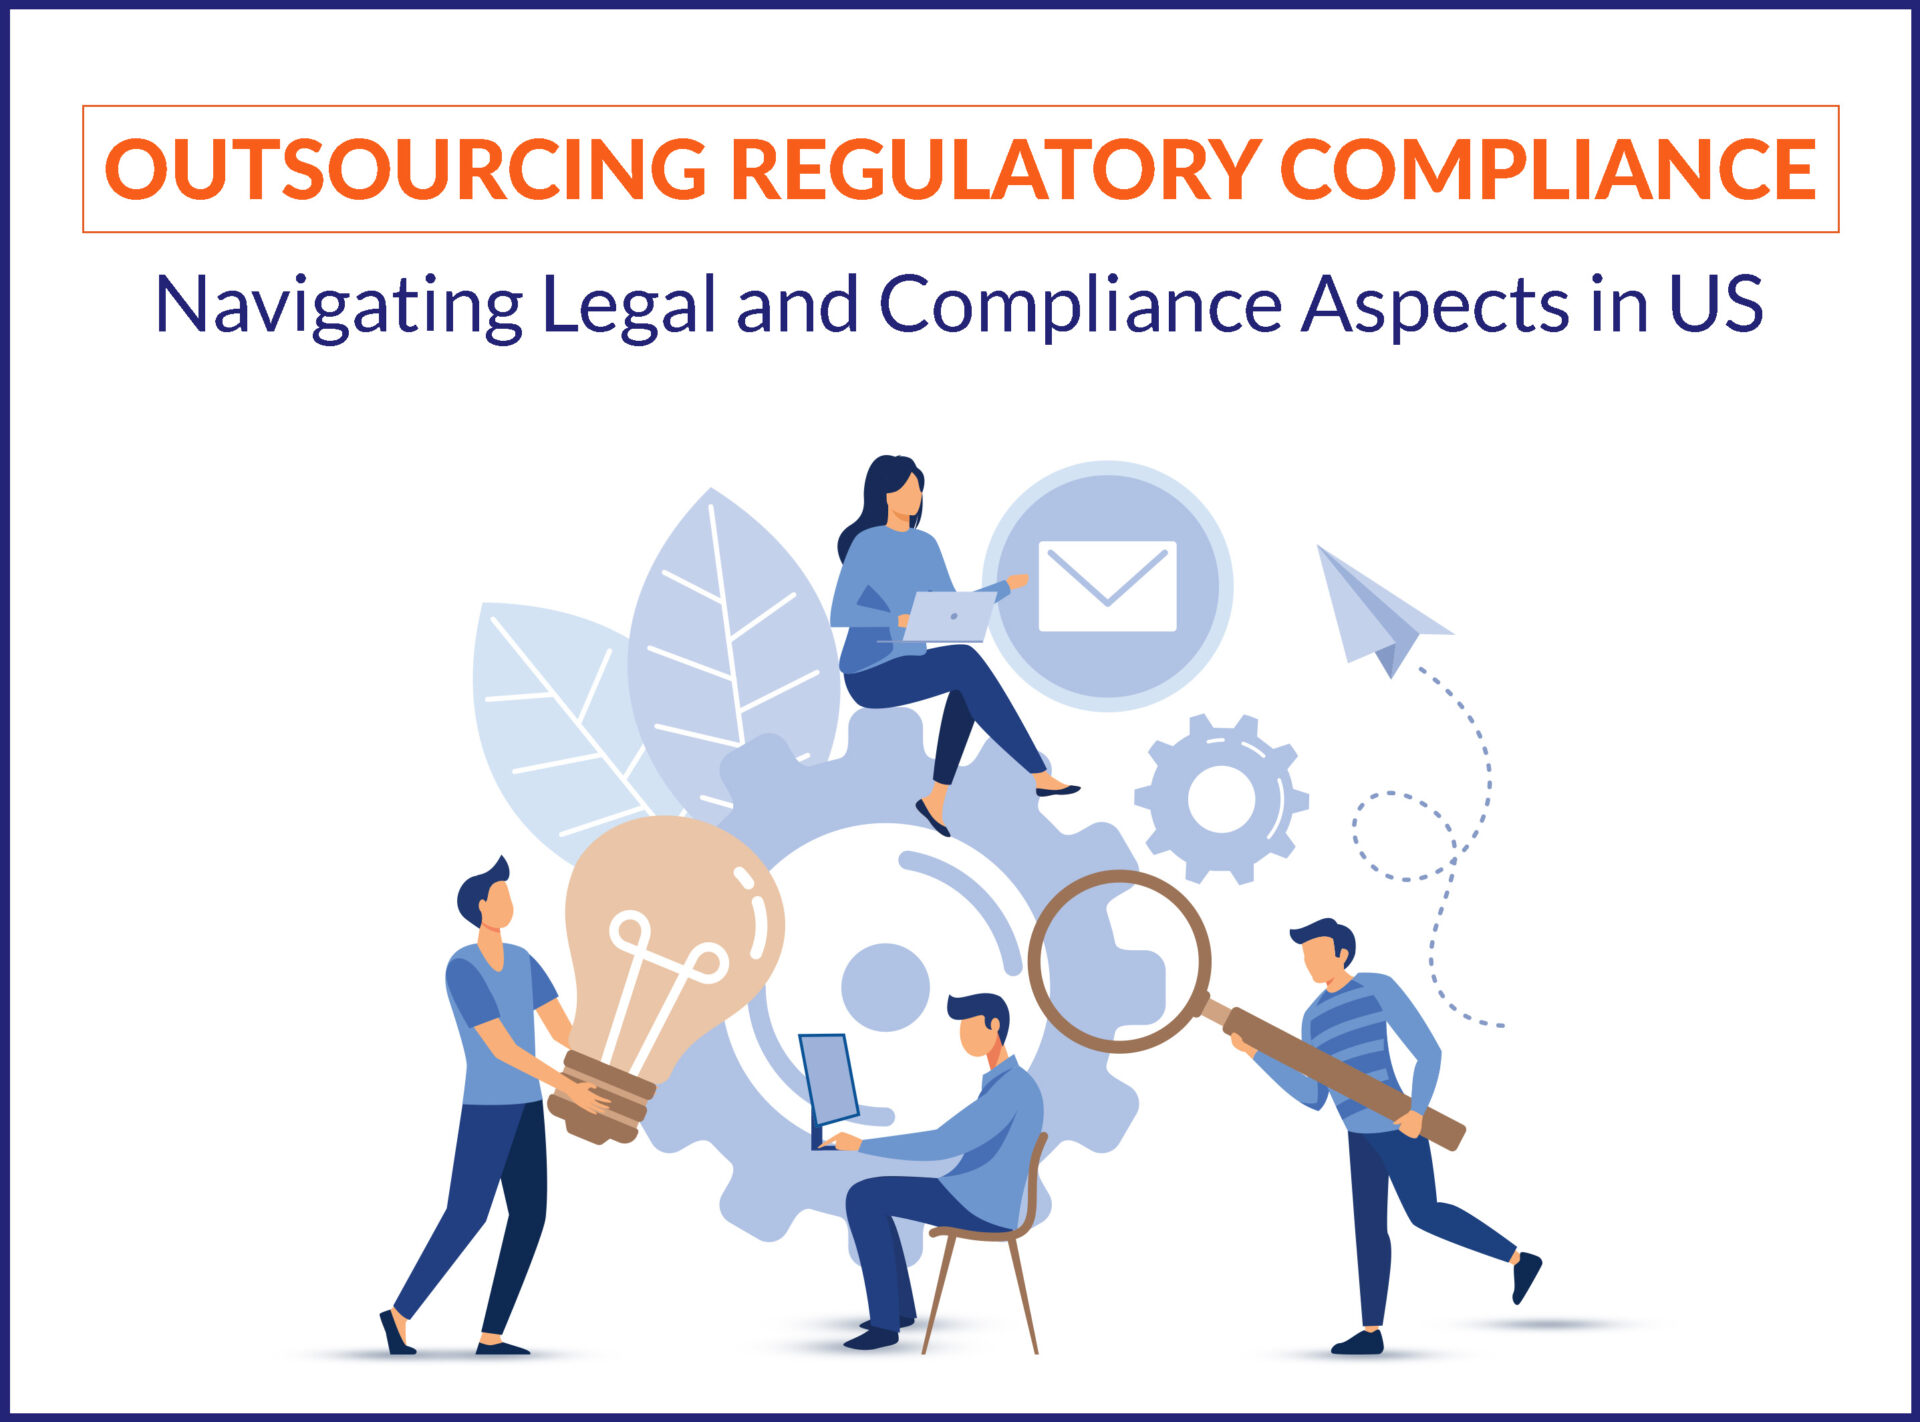 Outsourcing Regulatory Compliance: Navigating Legal and Compliance Aspects in US